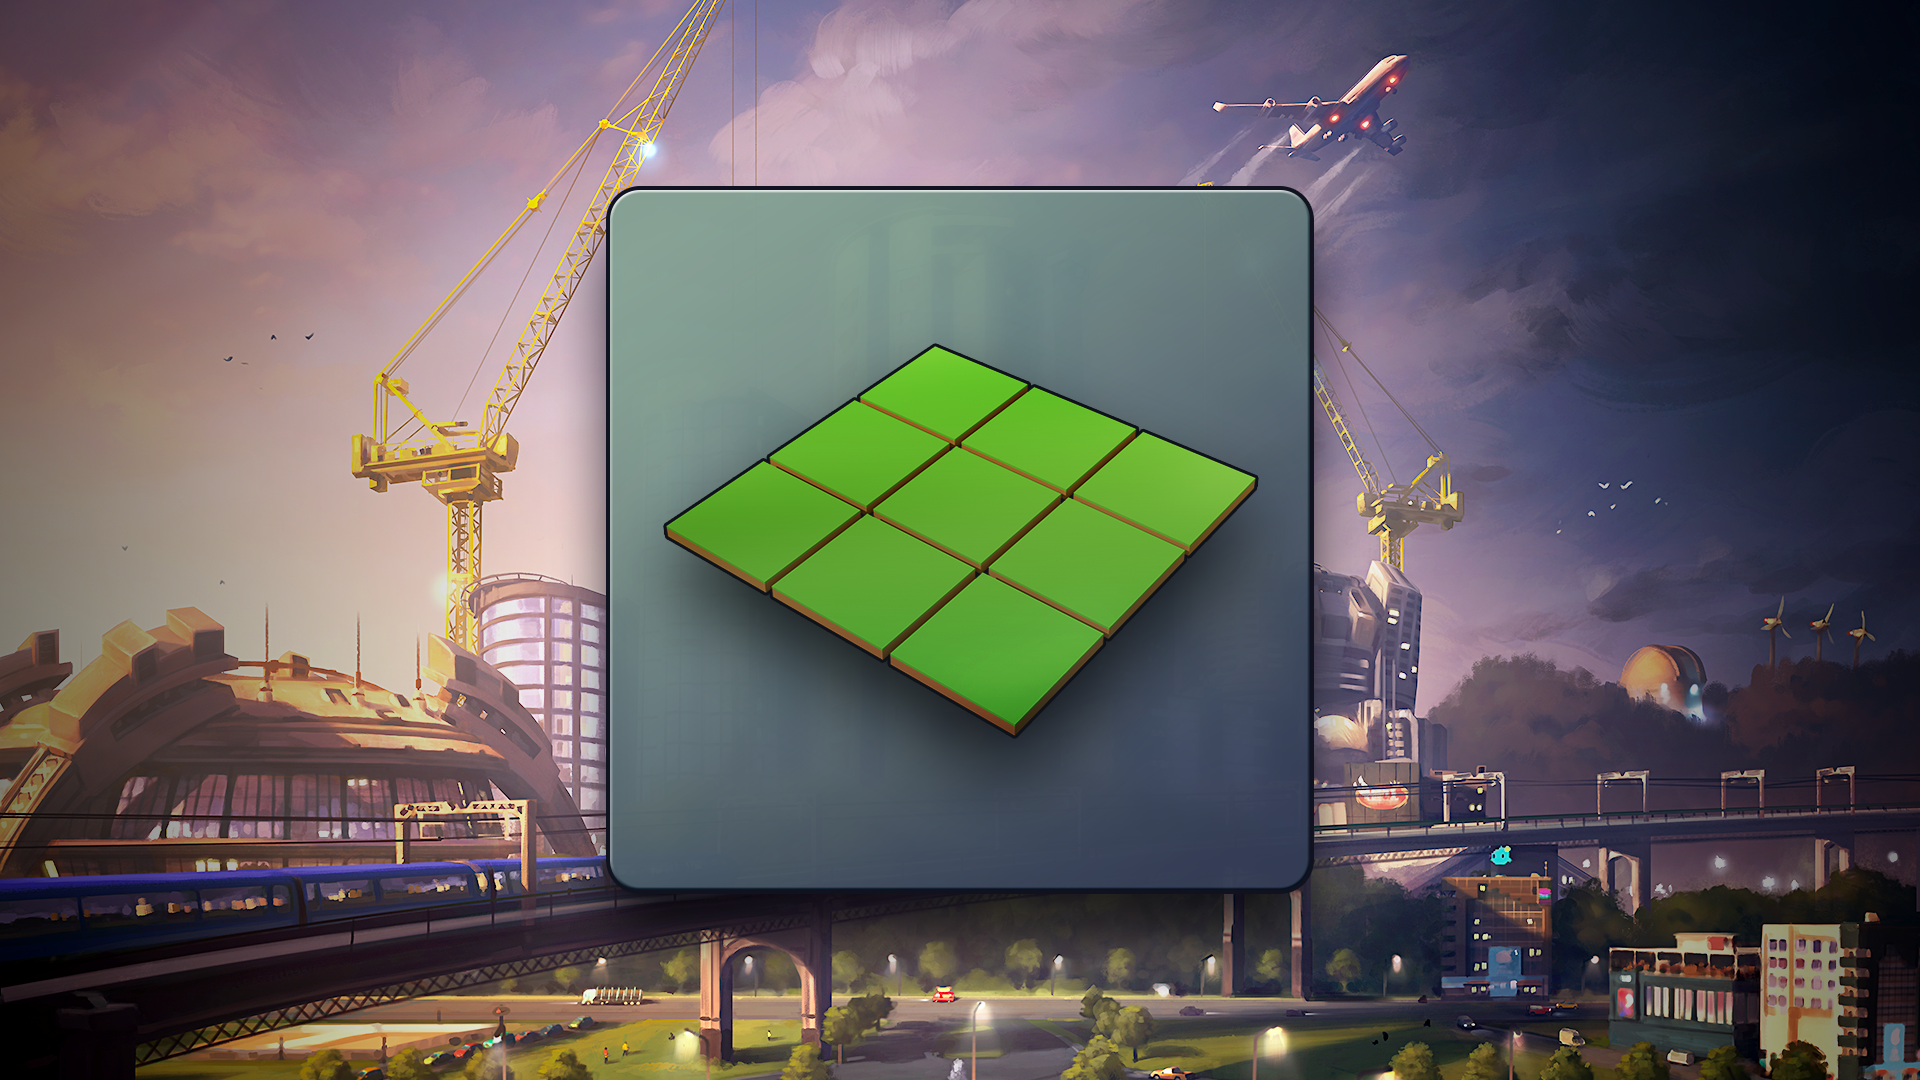 Icon for SIMulated City